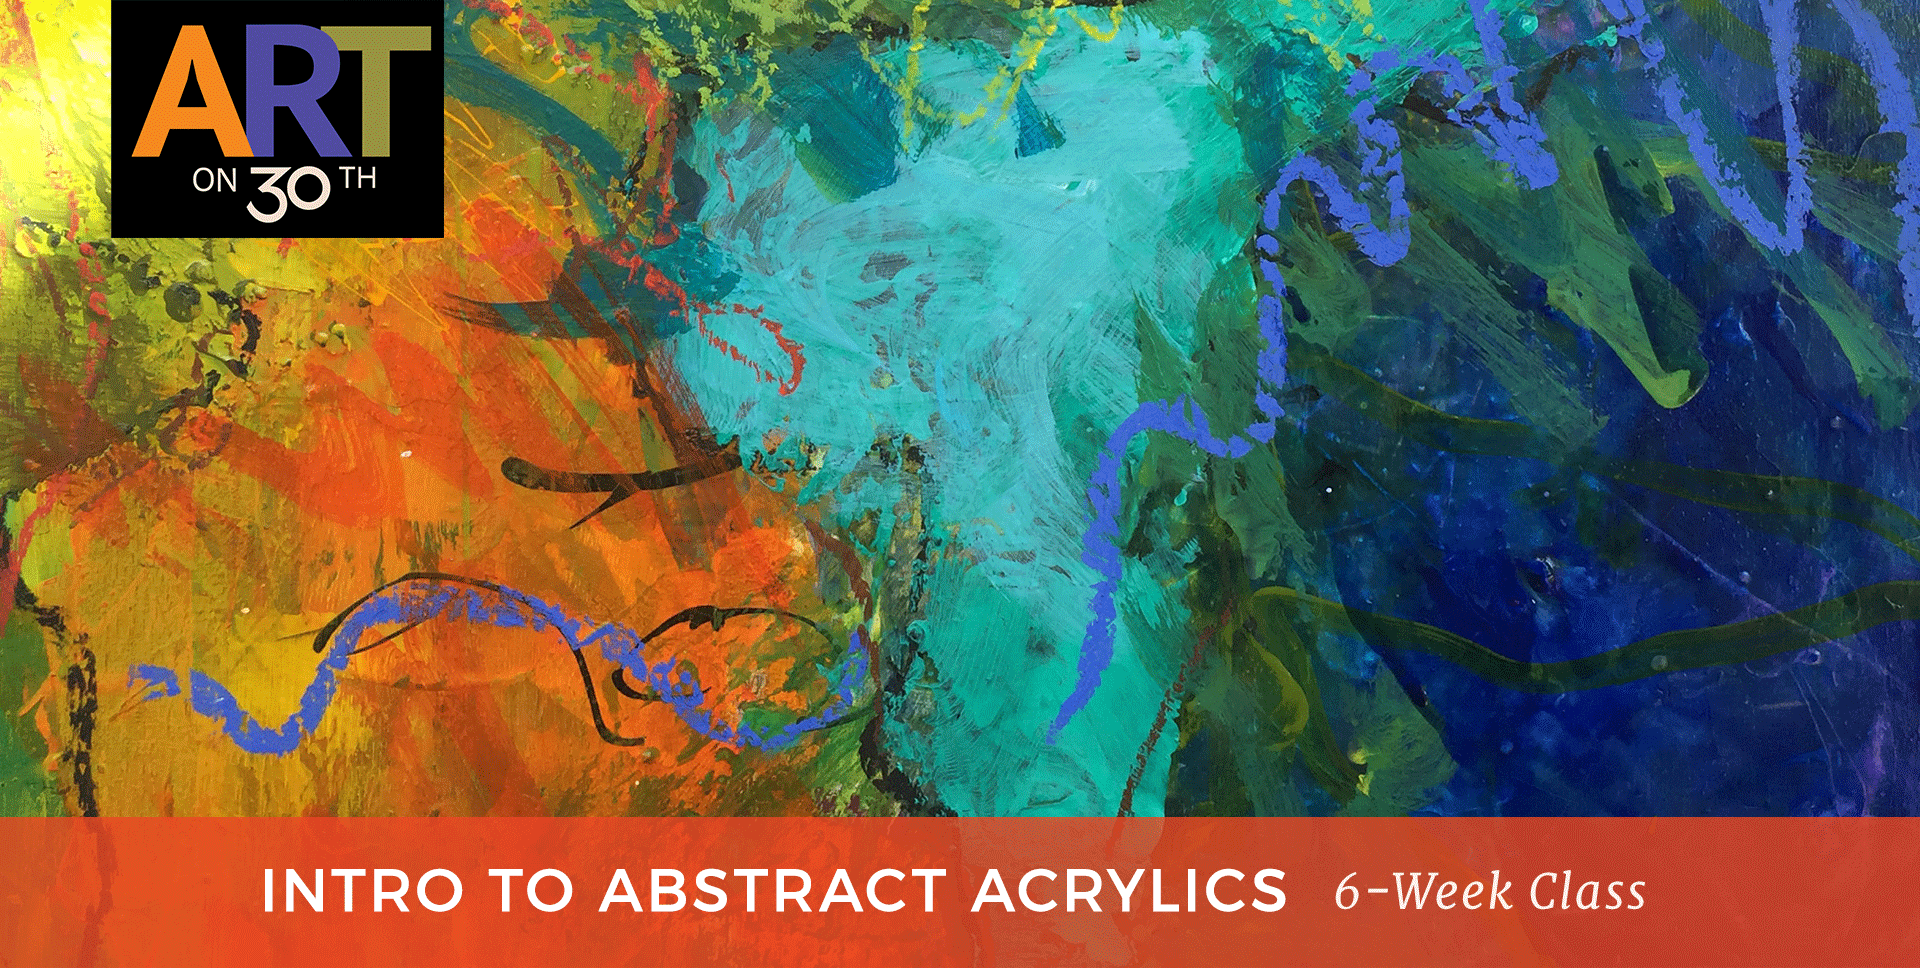 TUE AM - Intro to Abstract Acrylic Painting with Kristen Ide